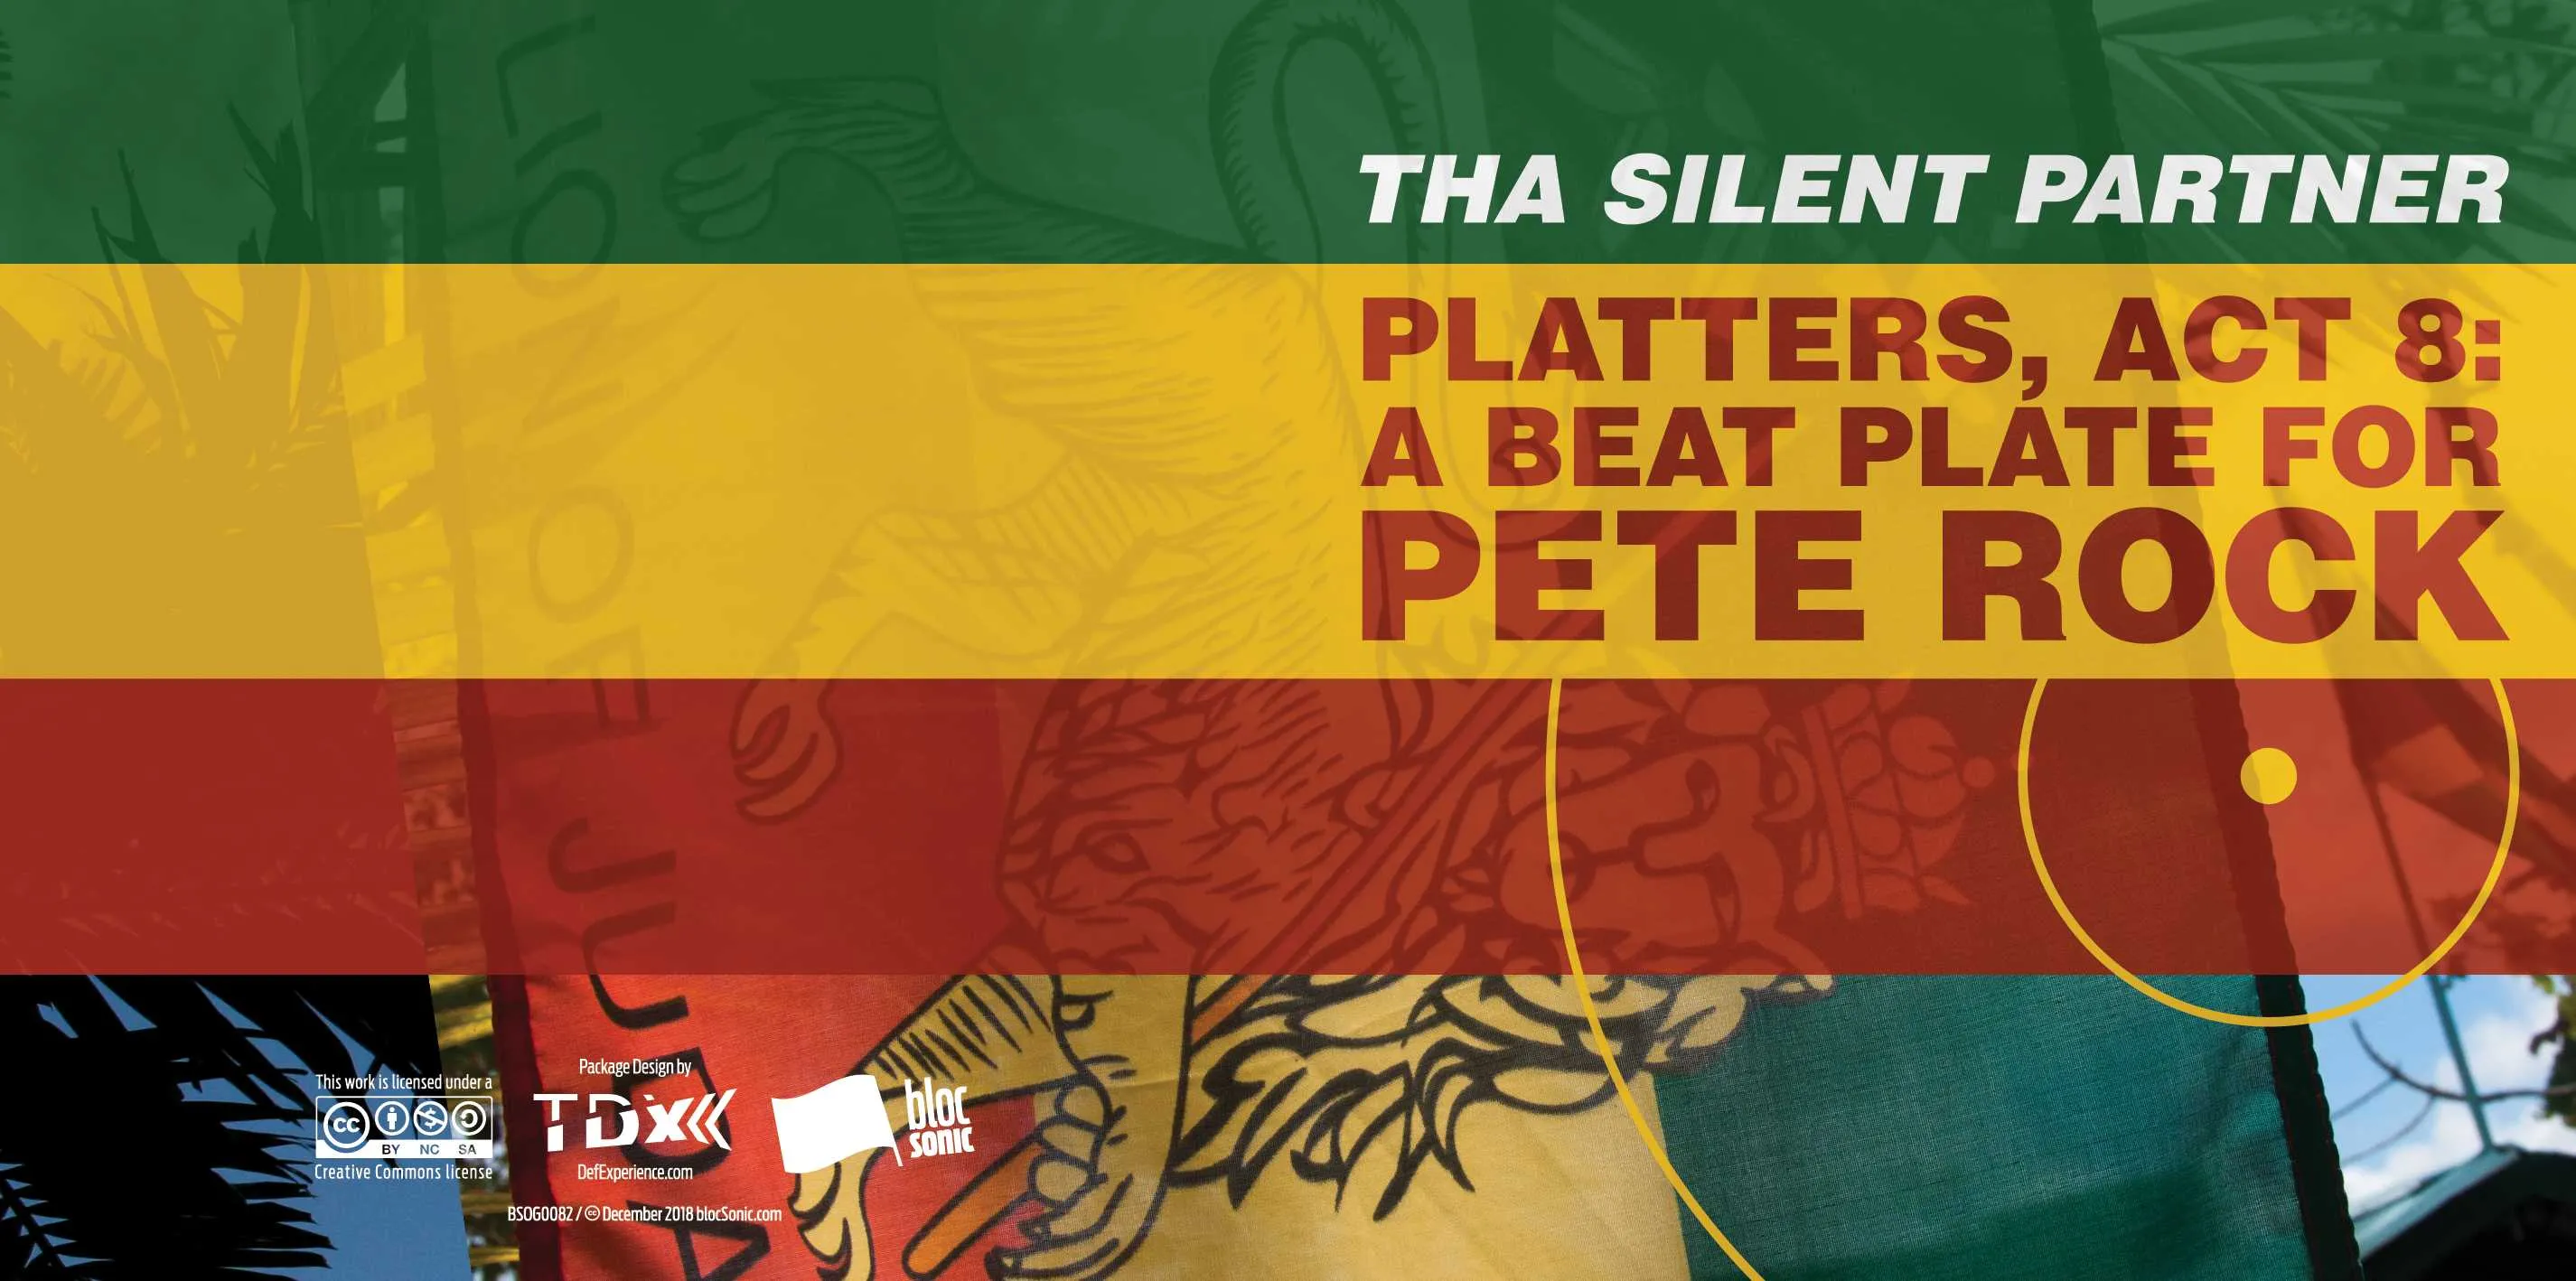 Album insert for “Platters, Act 8: A Beat Plate For Pete Rock” by Tha Silent Partner